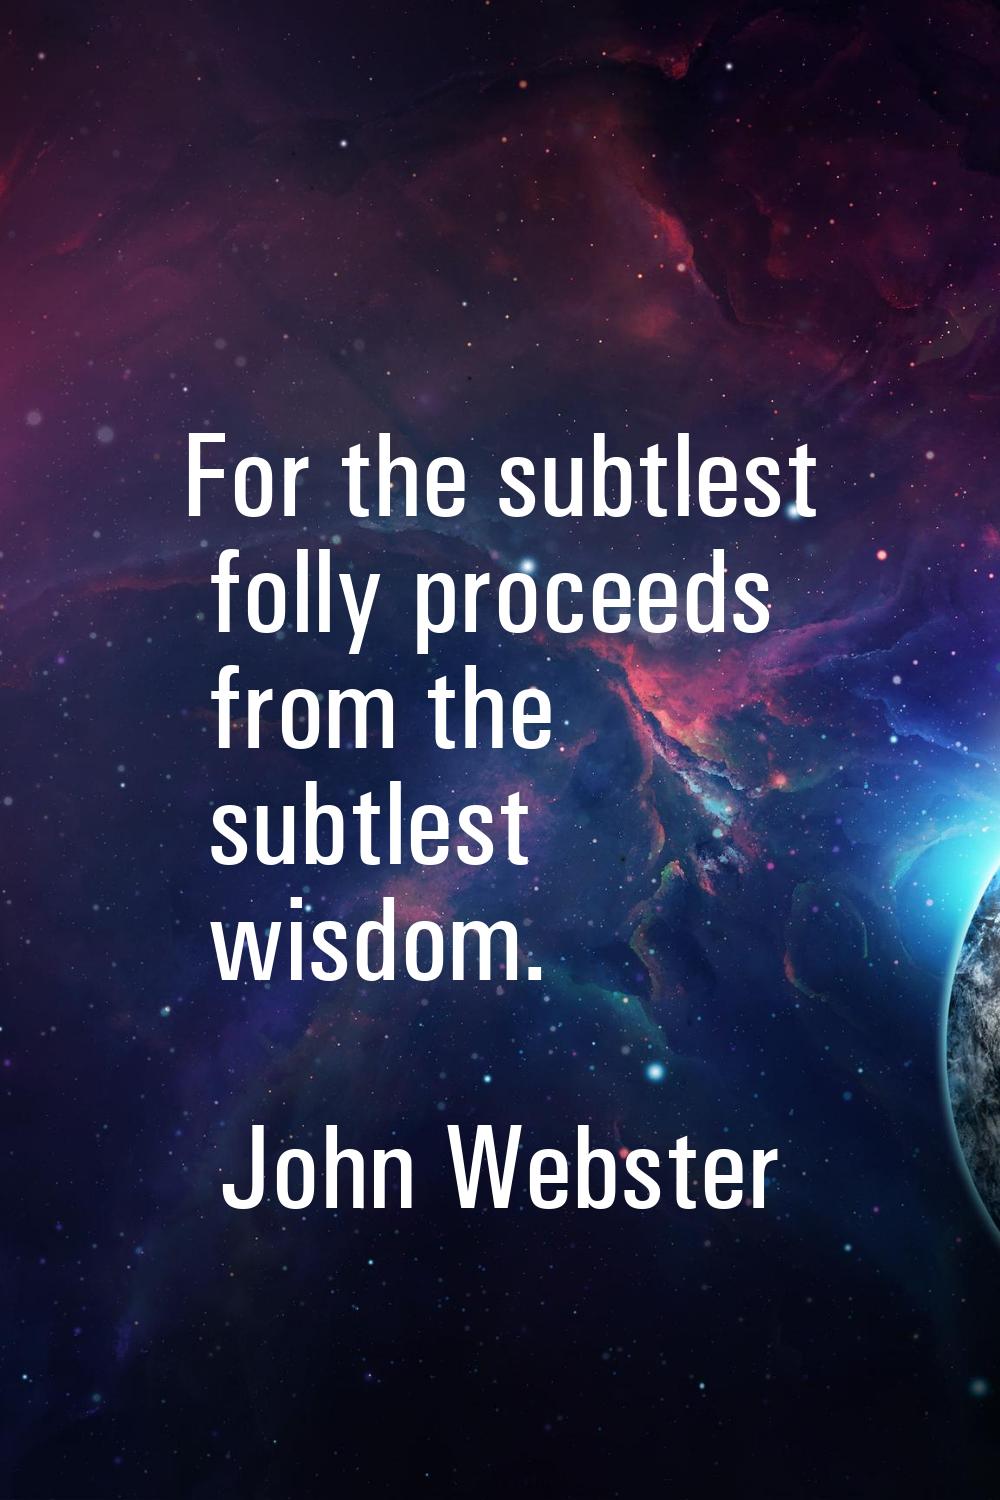 For the subtlest folly proceeds from the subtlest wisdom.